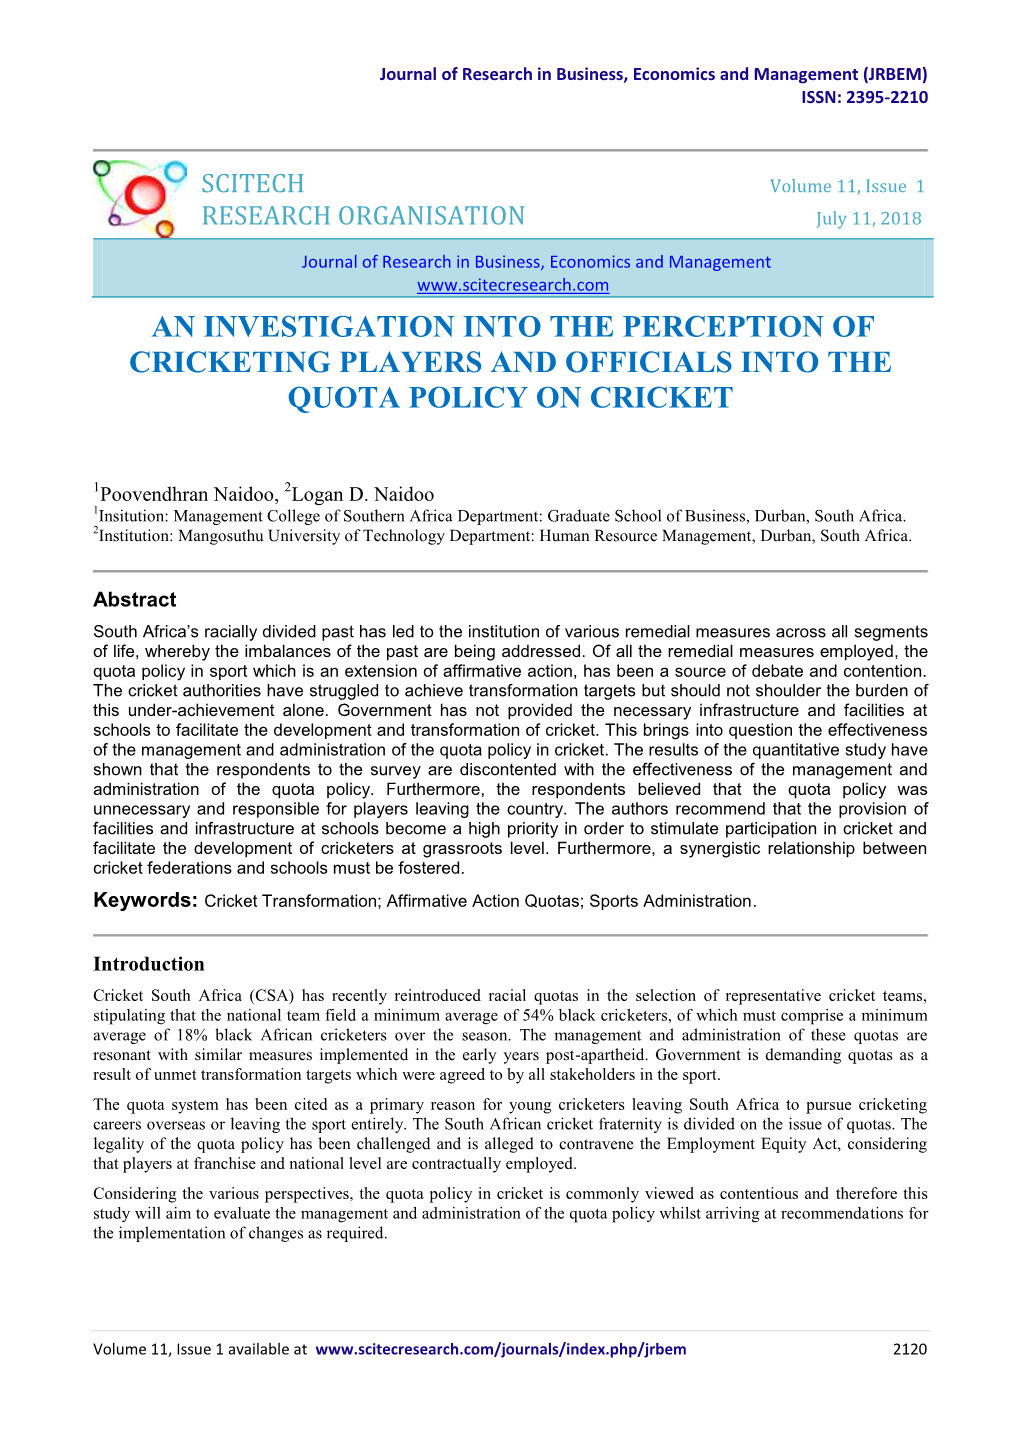 An Investigation Into the Perception of Cricketing Players and Officials Into the Quota Policy on Cricket